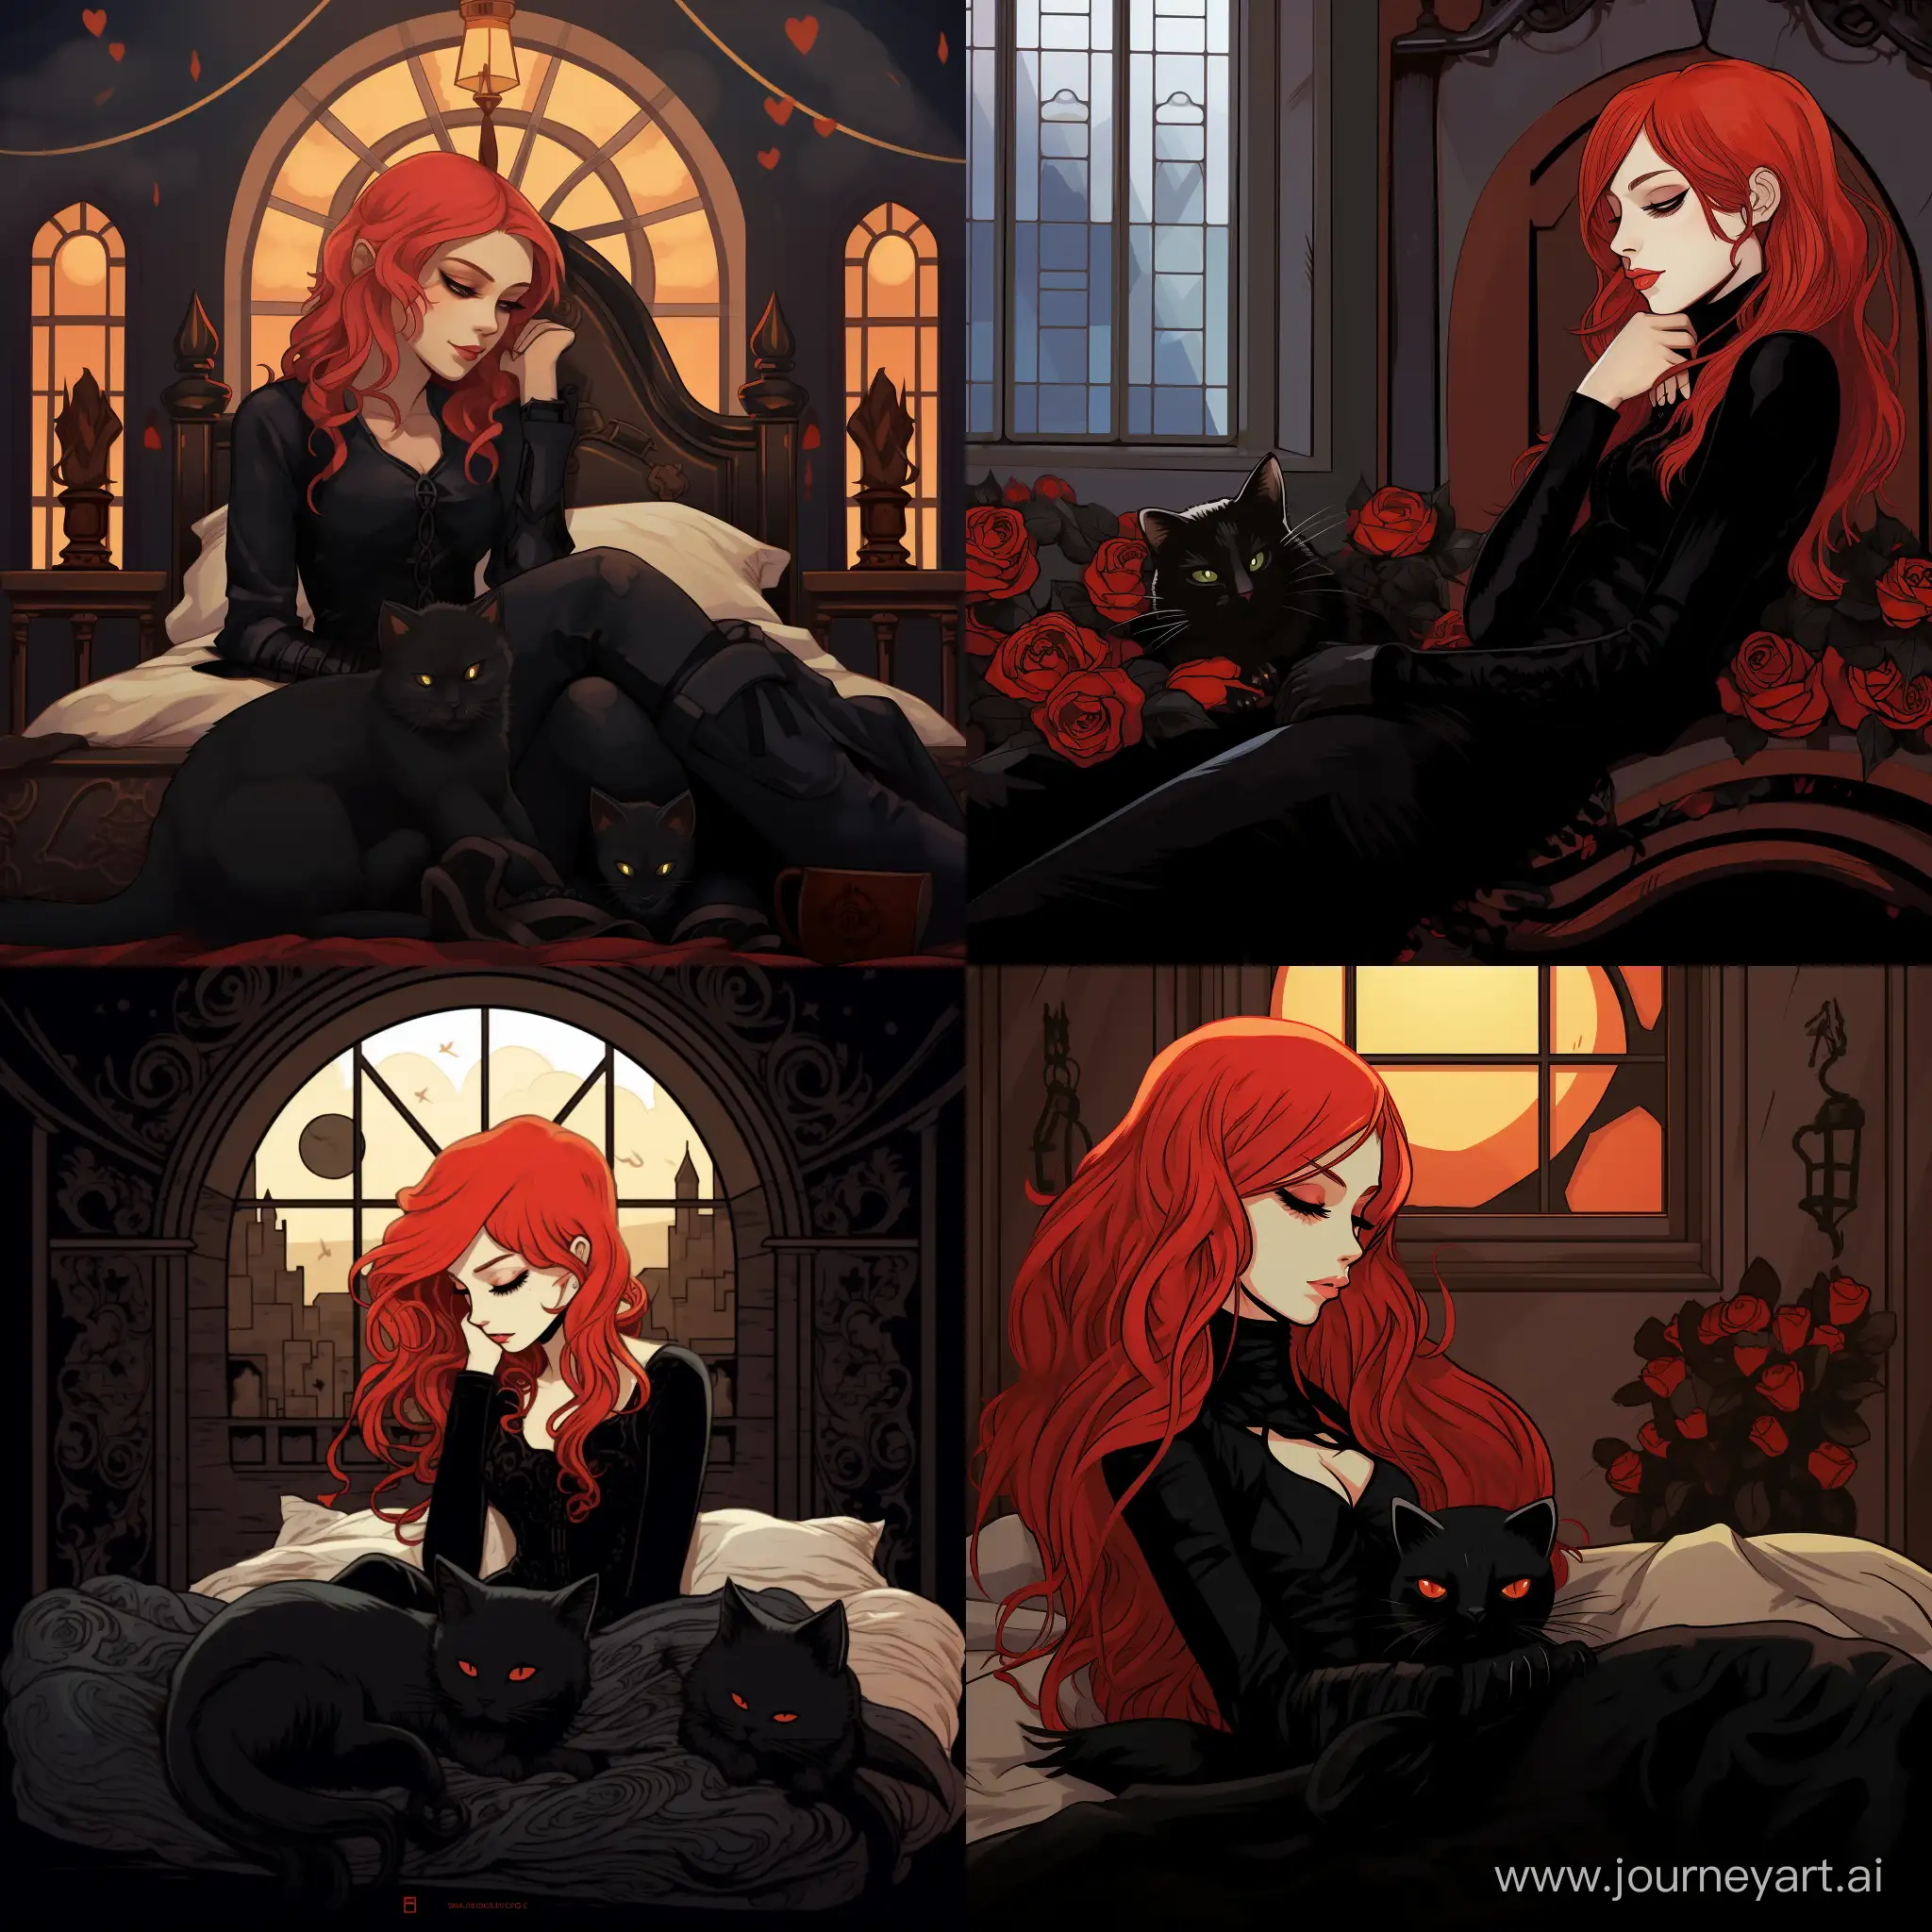 RedHaired-Girl-Sleeping-in-Gothic-Dress-Next-to-GothicStyle-Cat